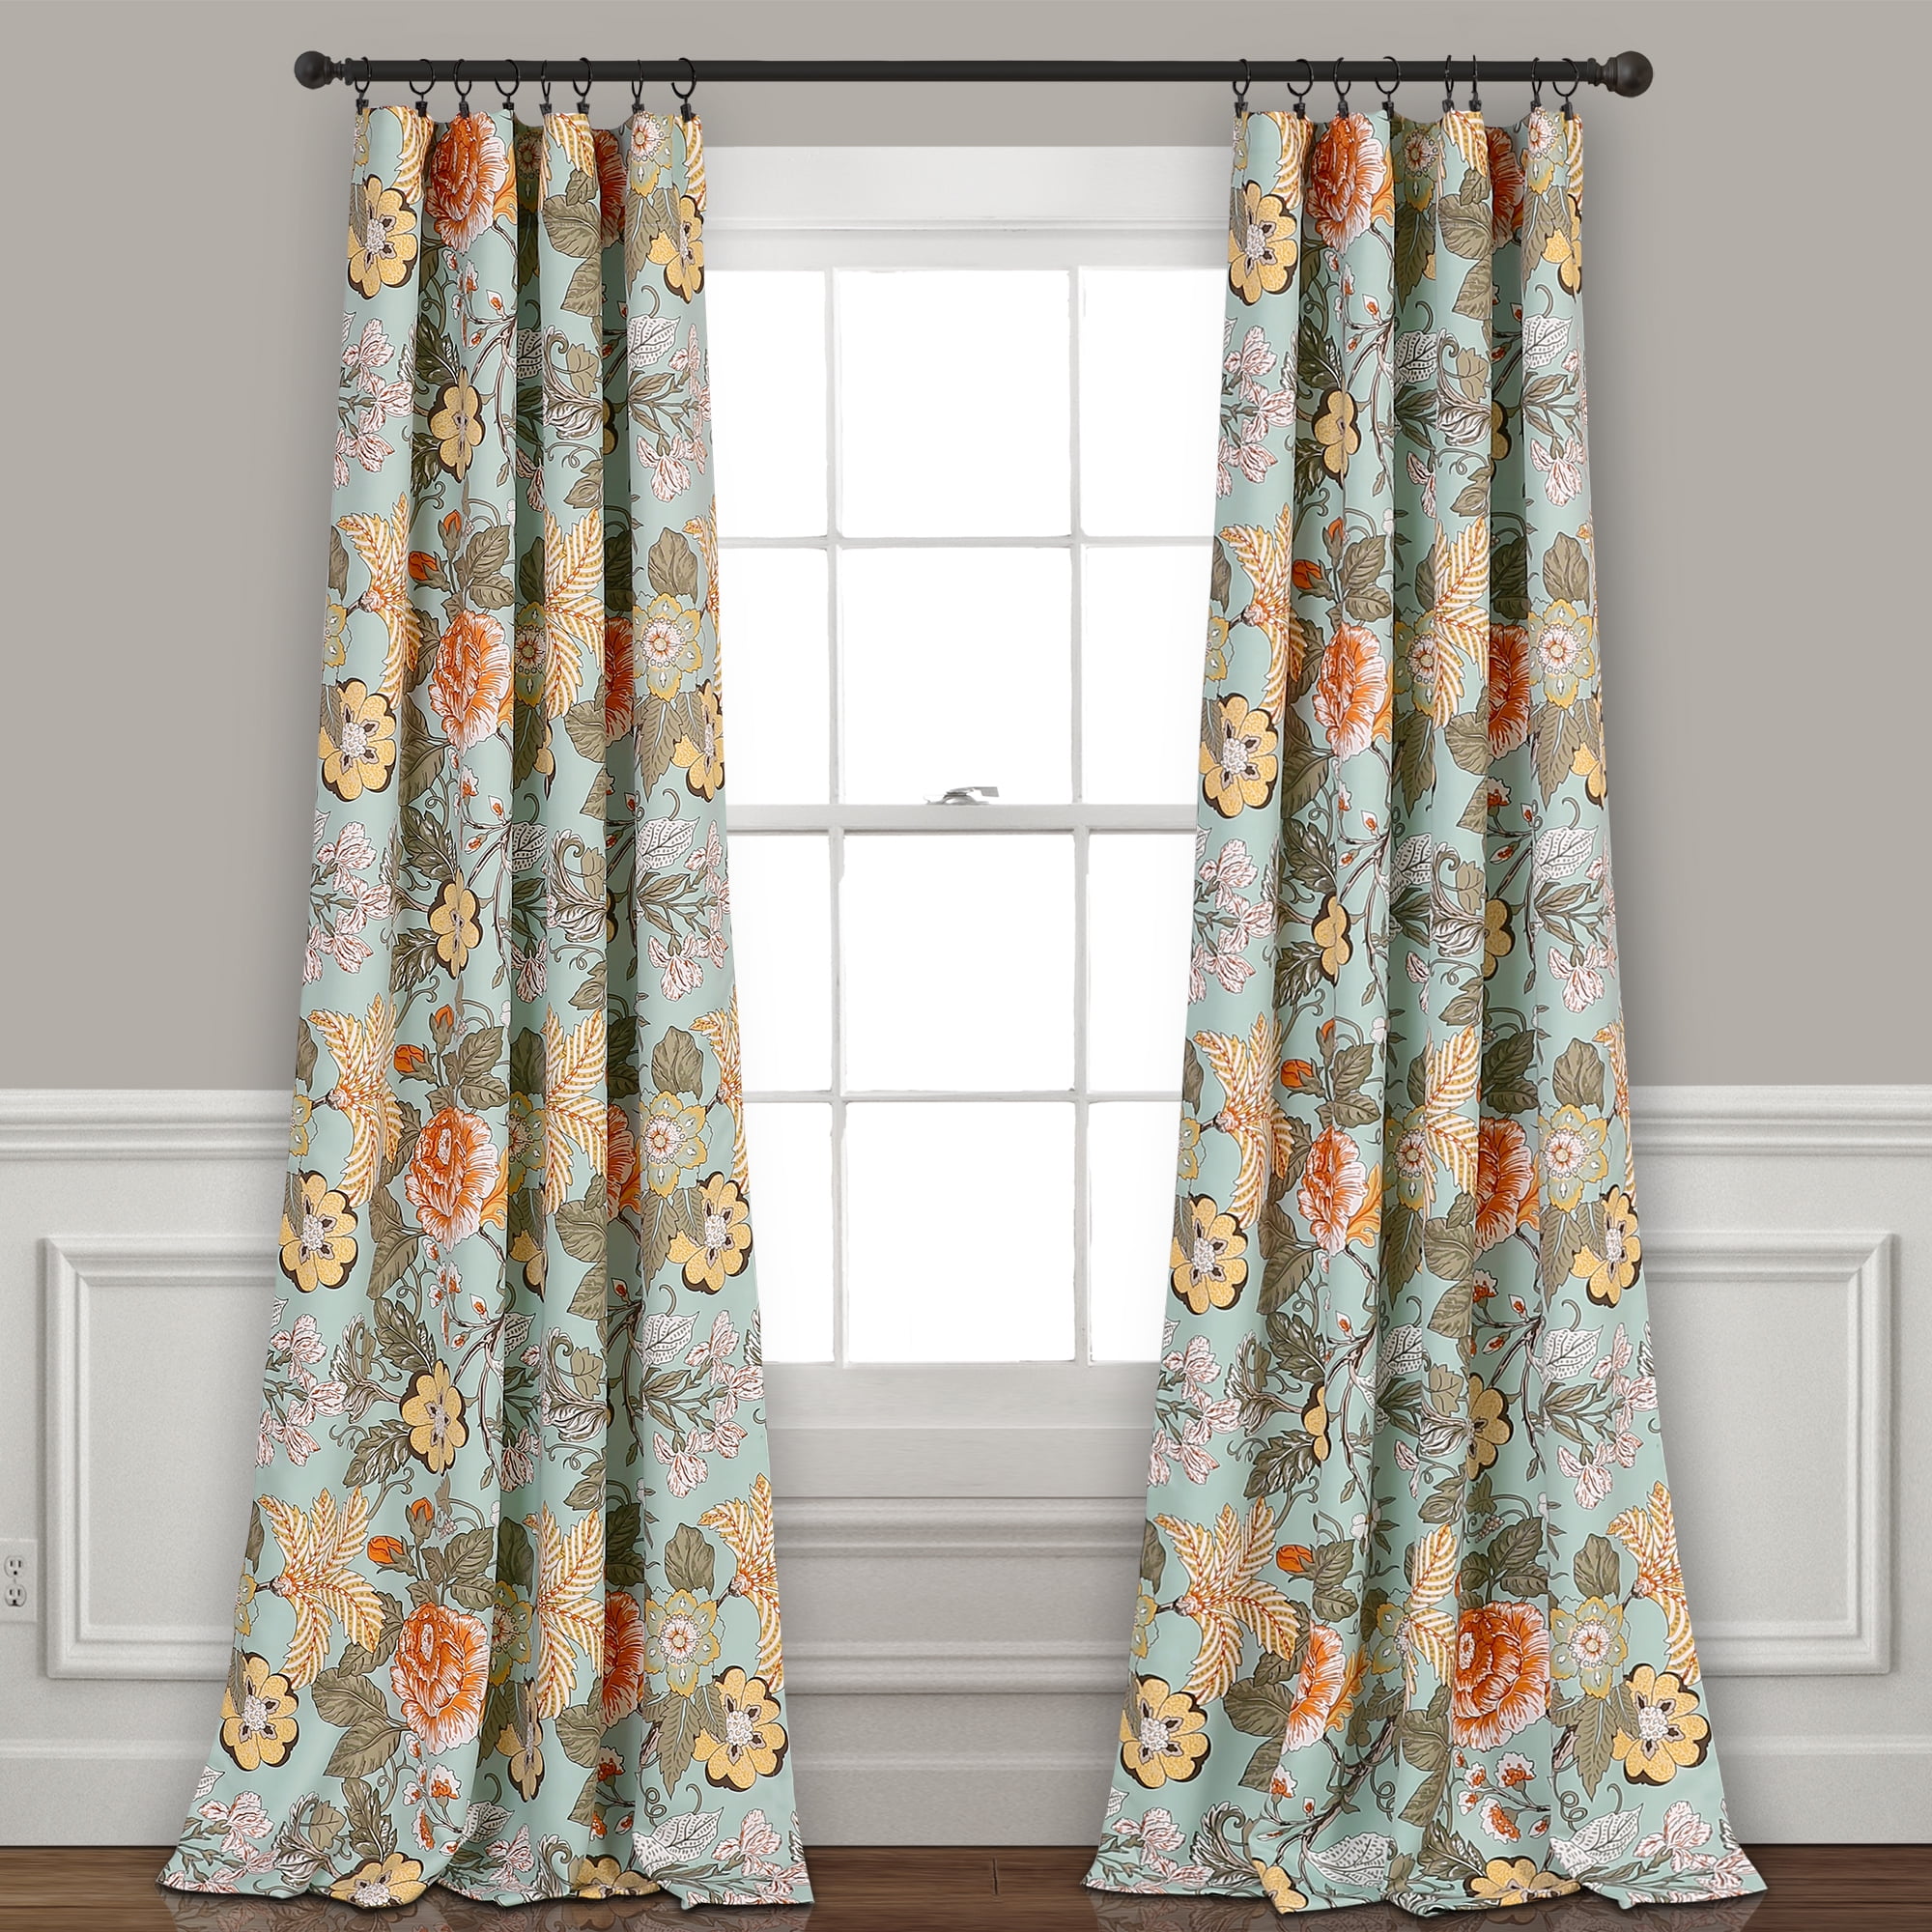 Cottage Style Grommet Window Curtain Light Blocking Panels IN 63" FLORAL 2pc 